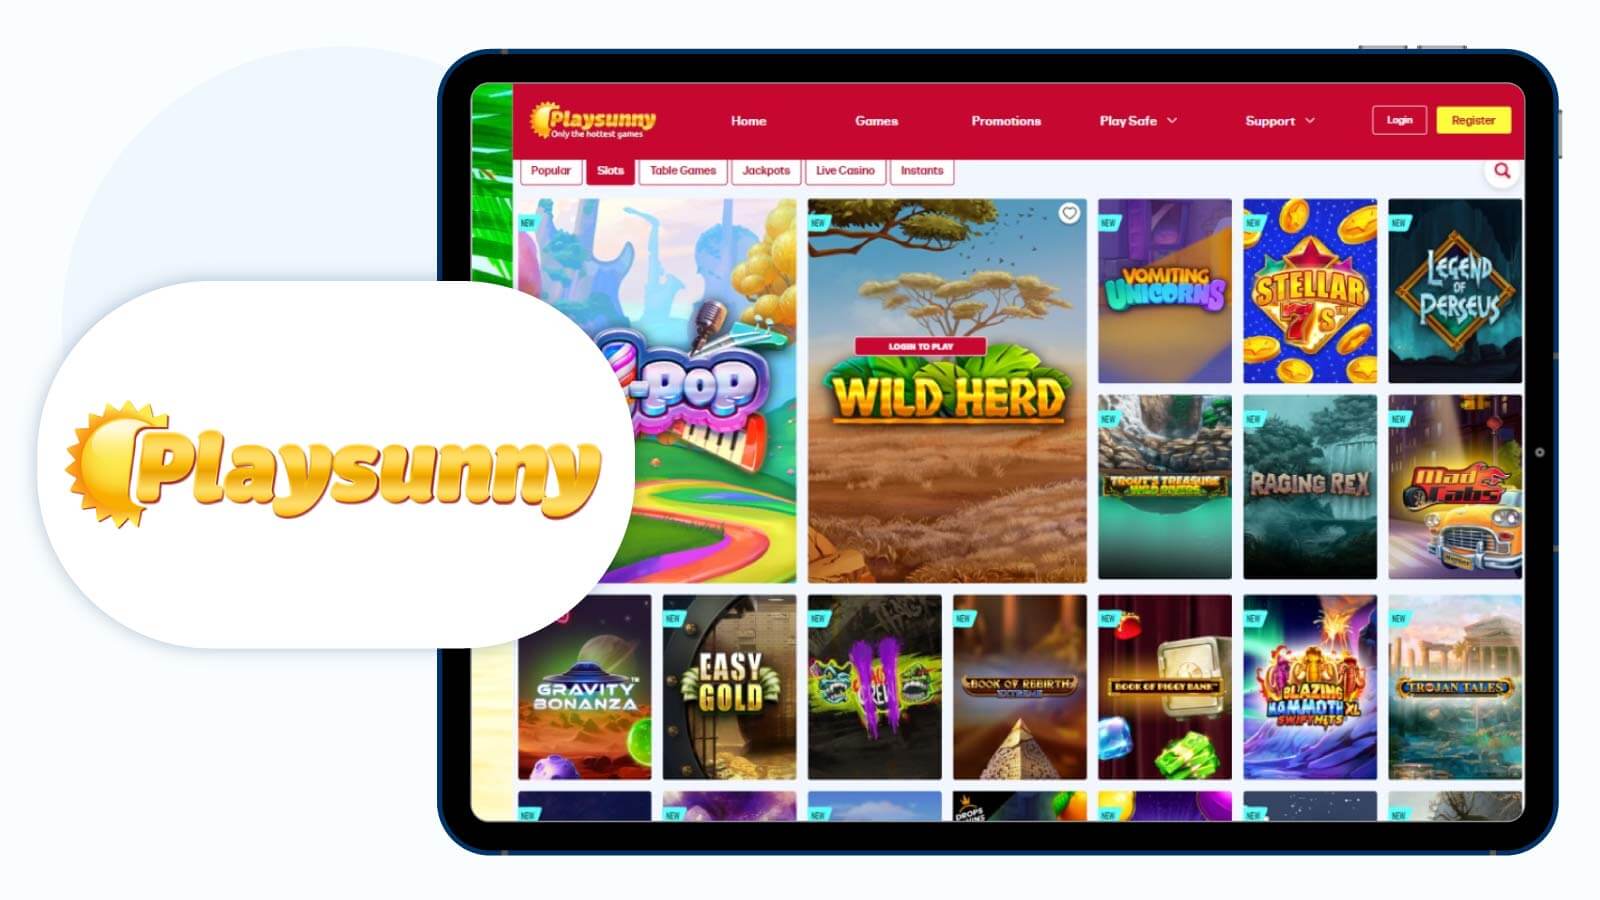 Playsunny-Casino-Best-for-Game-Offering